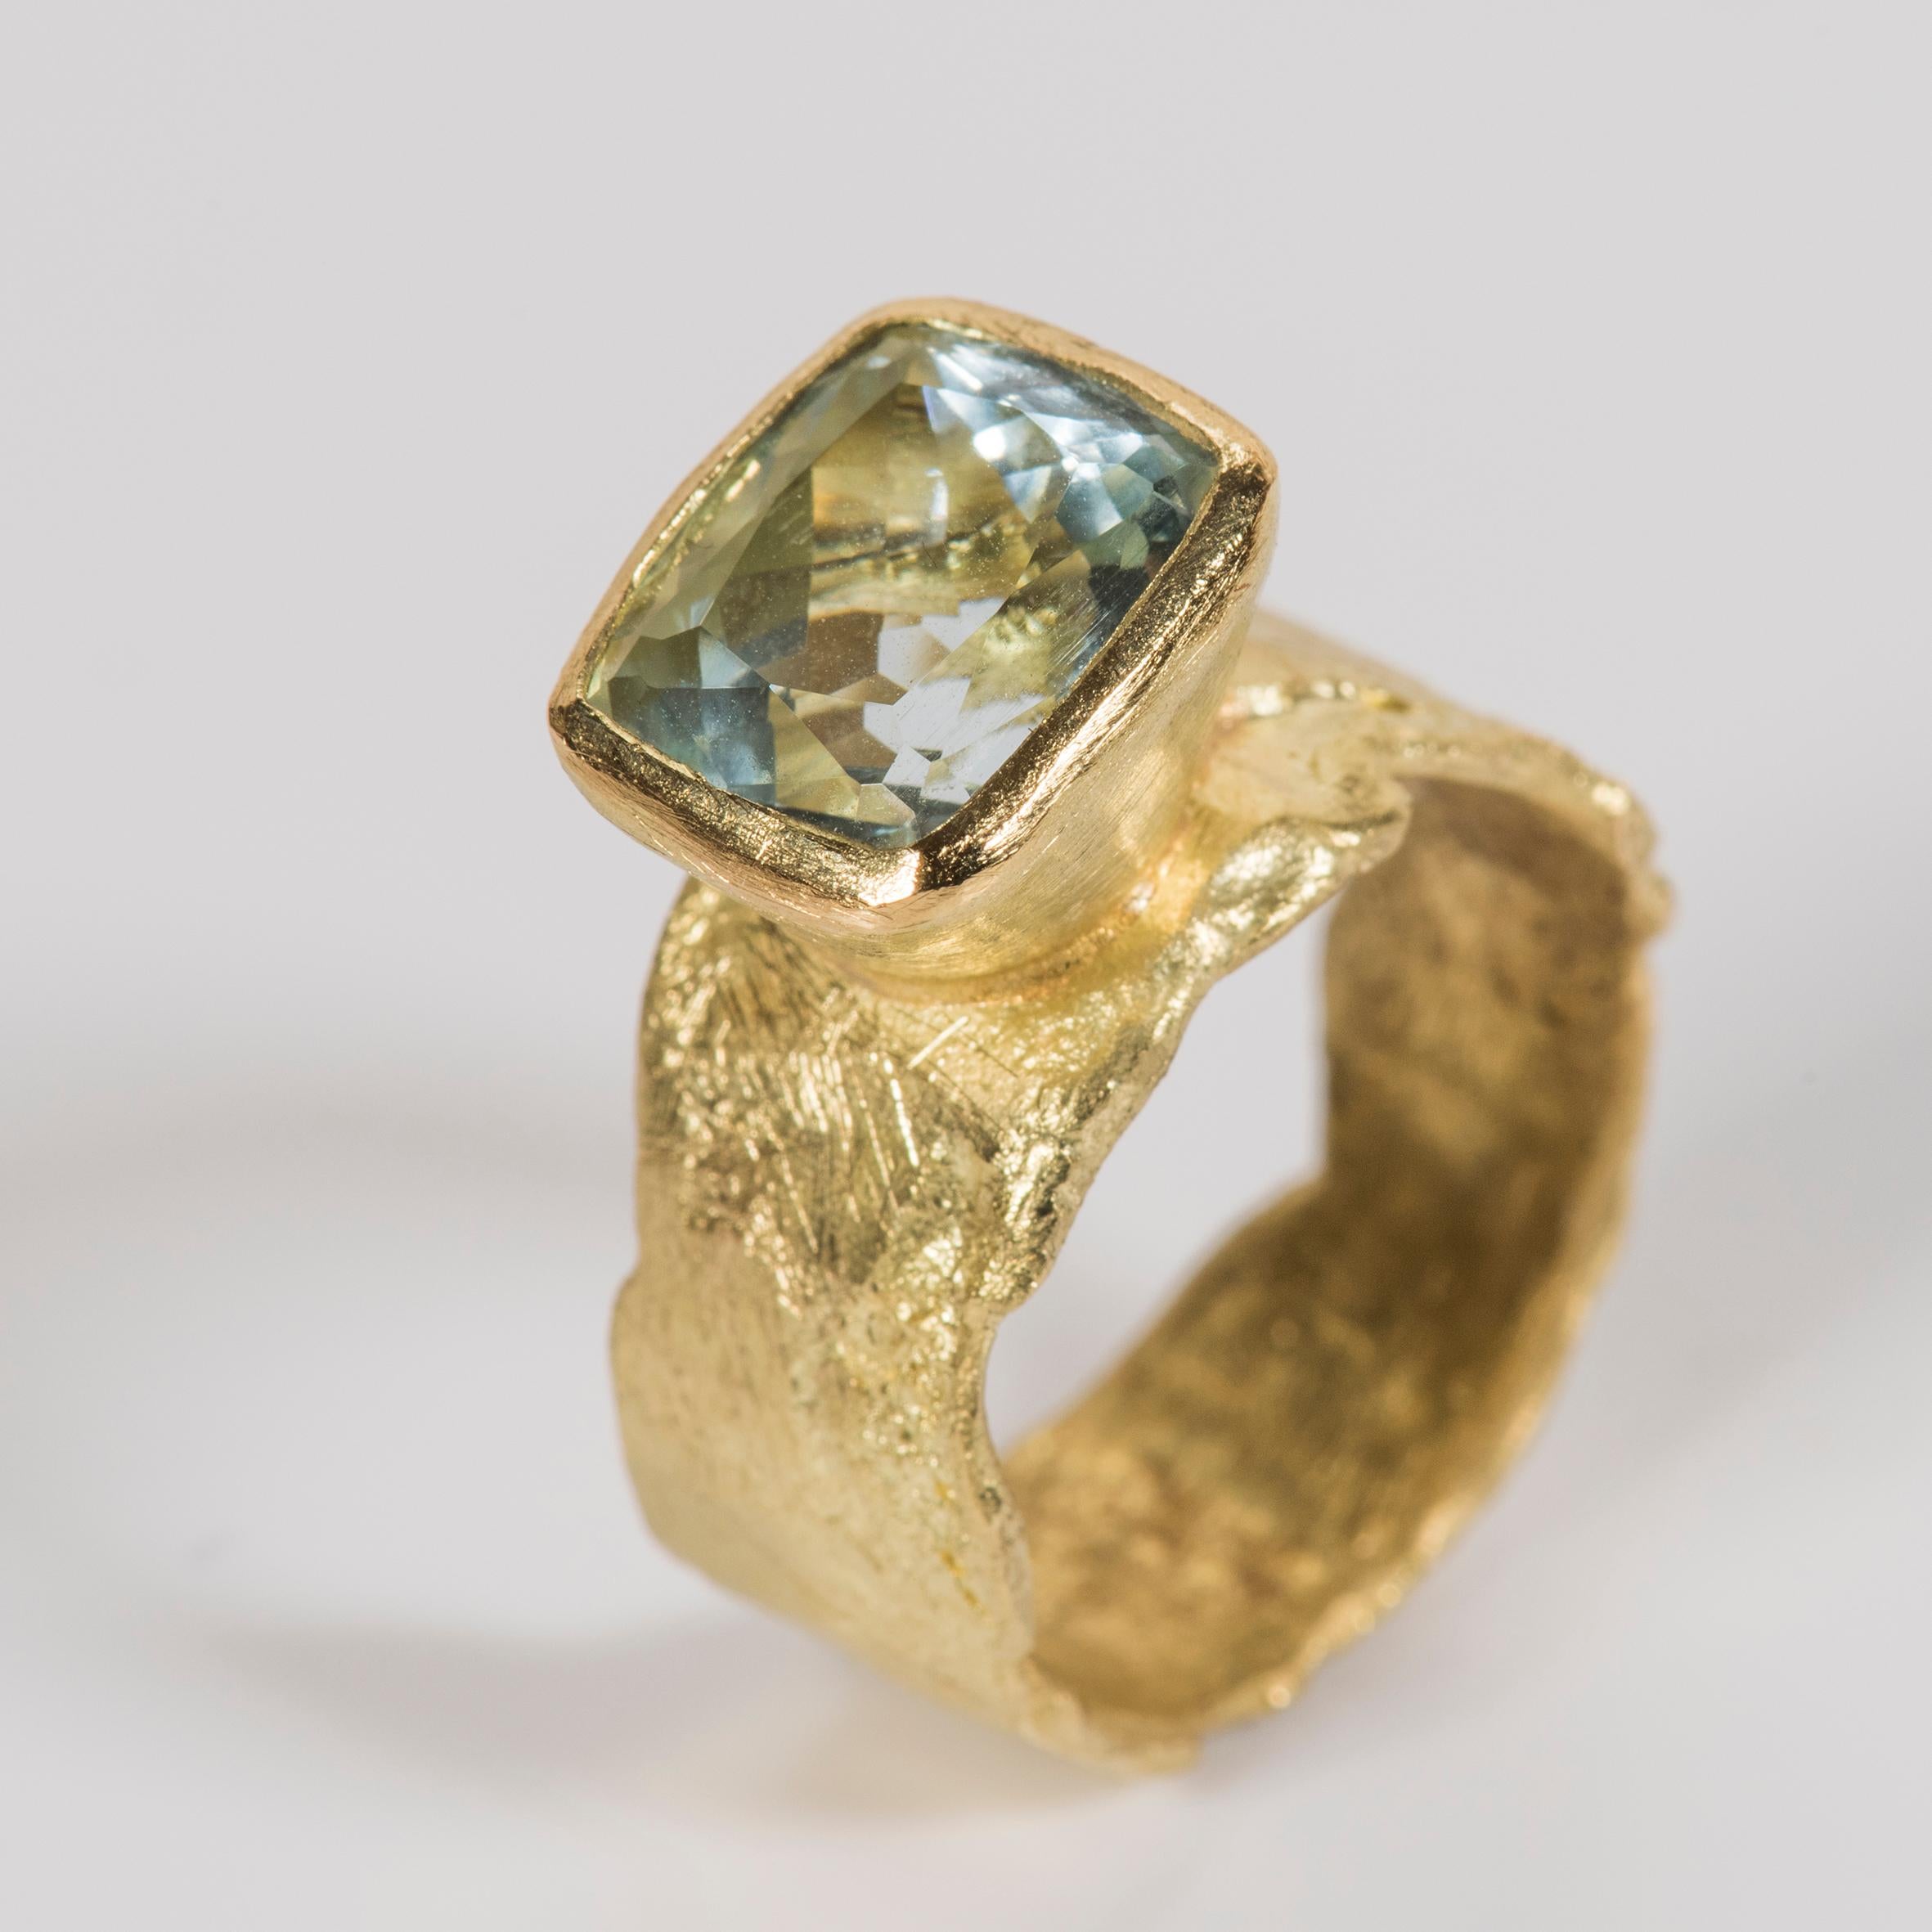 Wide 18k gold melted organic texture ring with 5ct cushion cut aquamarine. Disa Allsopp handmakes each ring using traditional reticulation and forging techniques. This means each ring has it's own character and unique texture. The aquamarine is